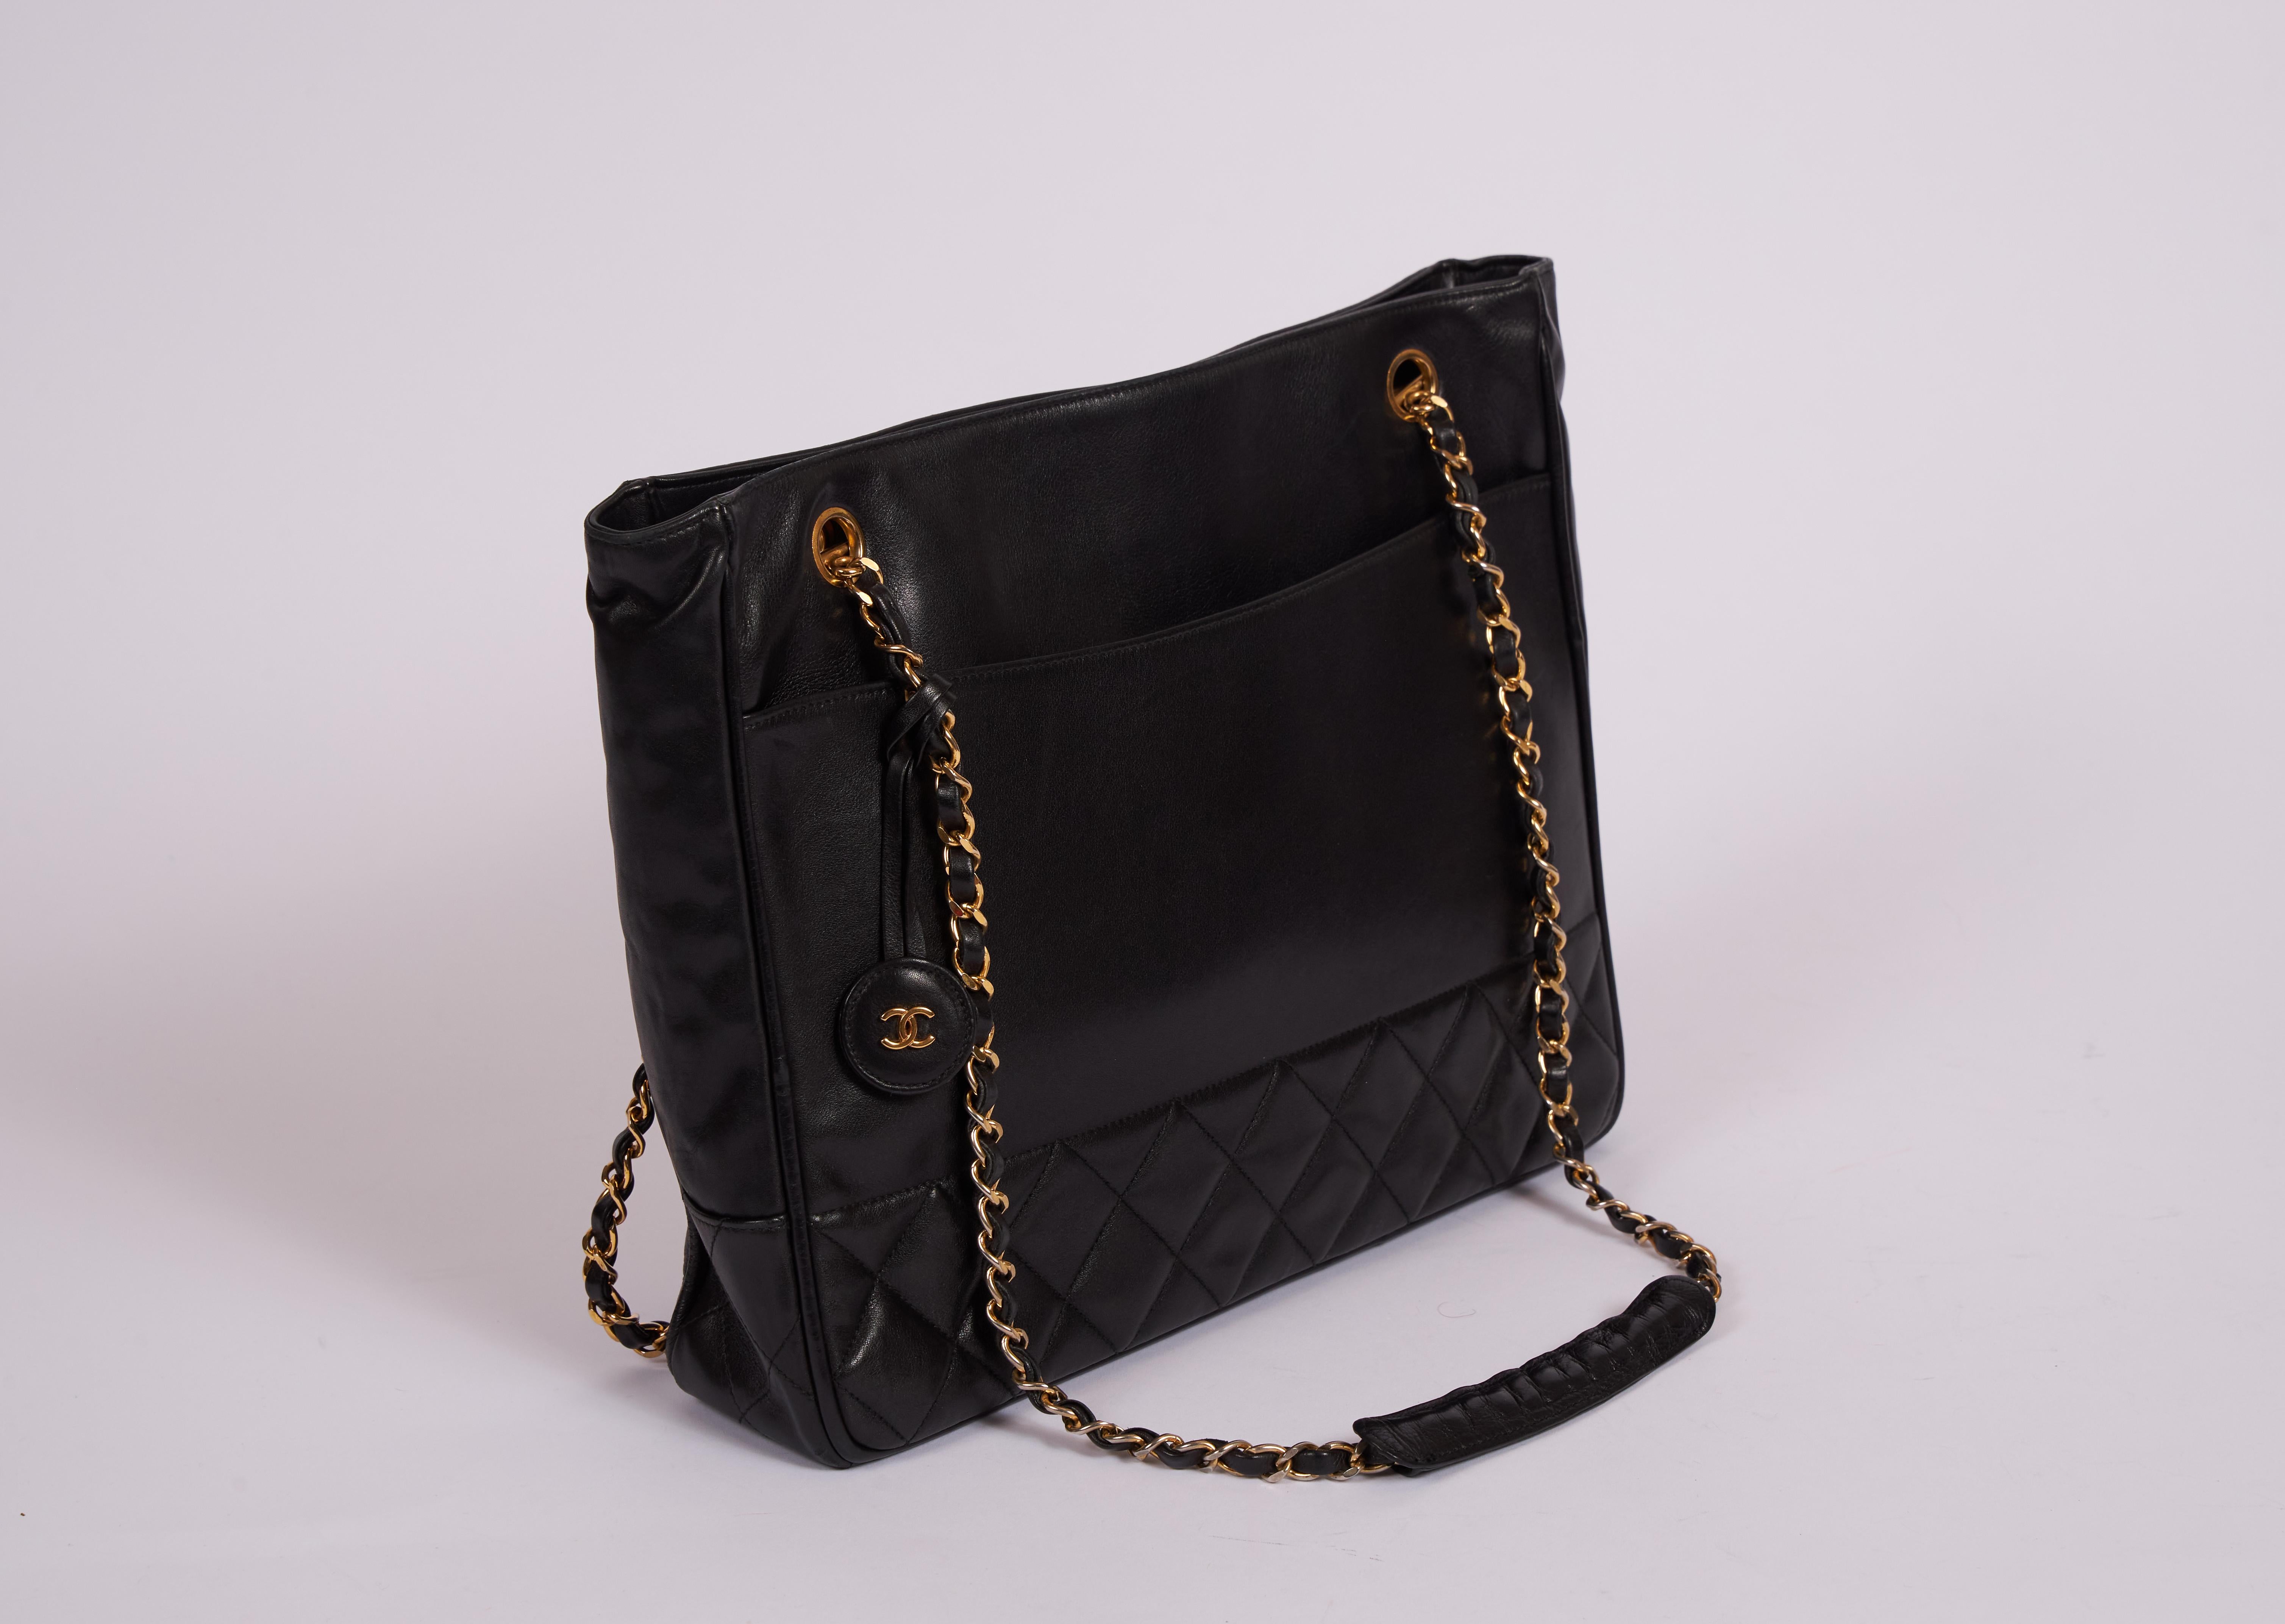 Chanel 90s black lambskin shoulder tote with quilted bottom and gold tone hardware. Shoulder drop 13